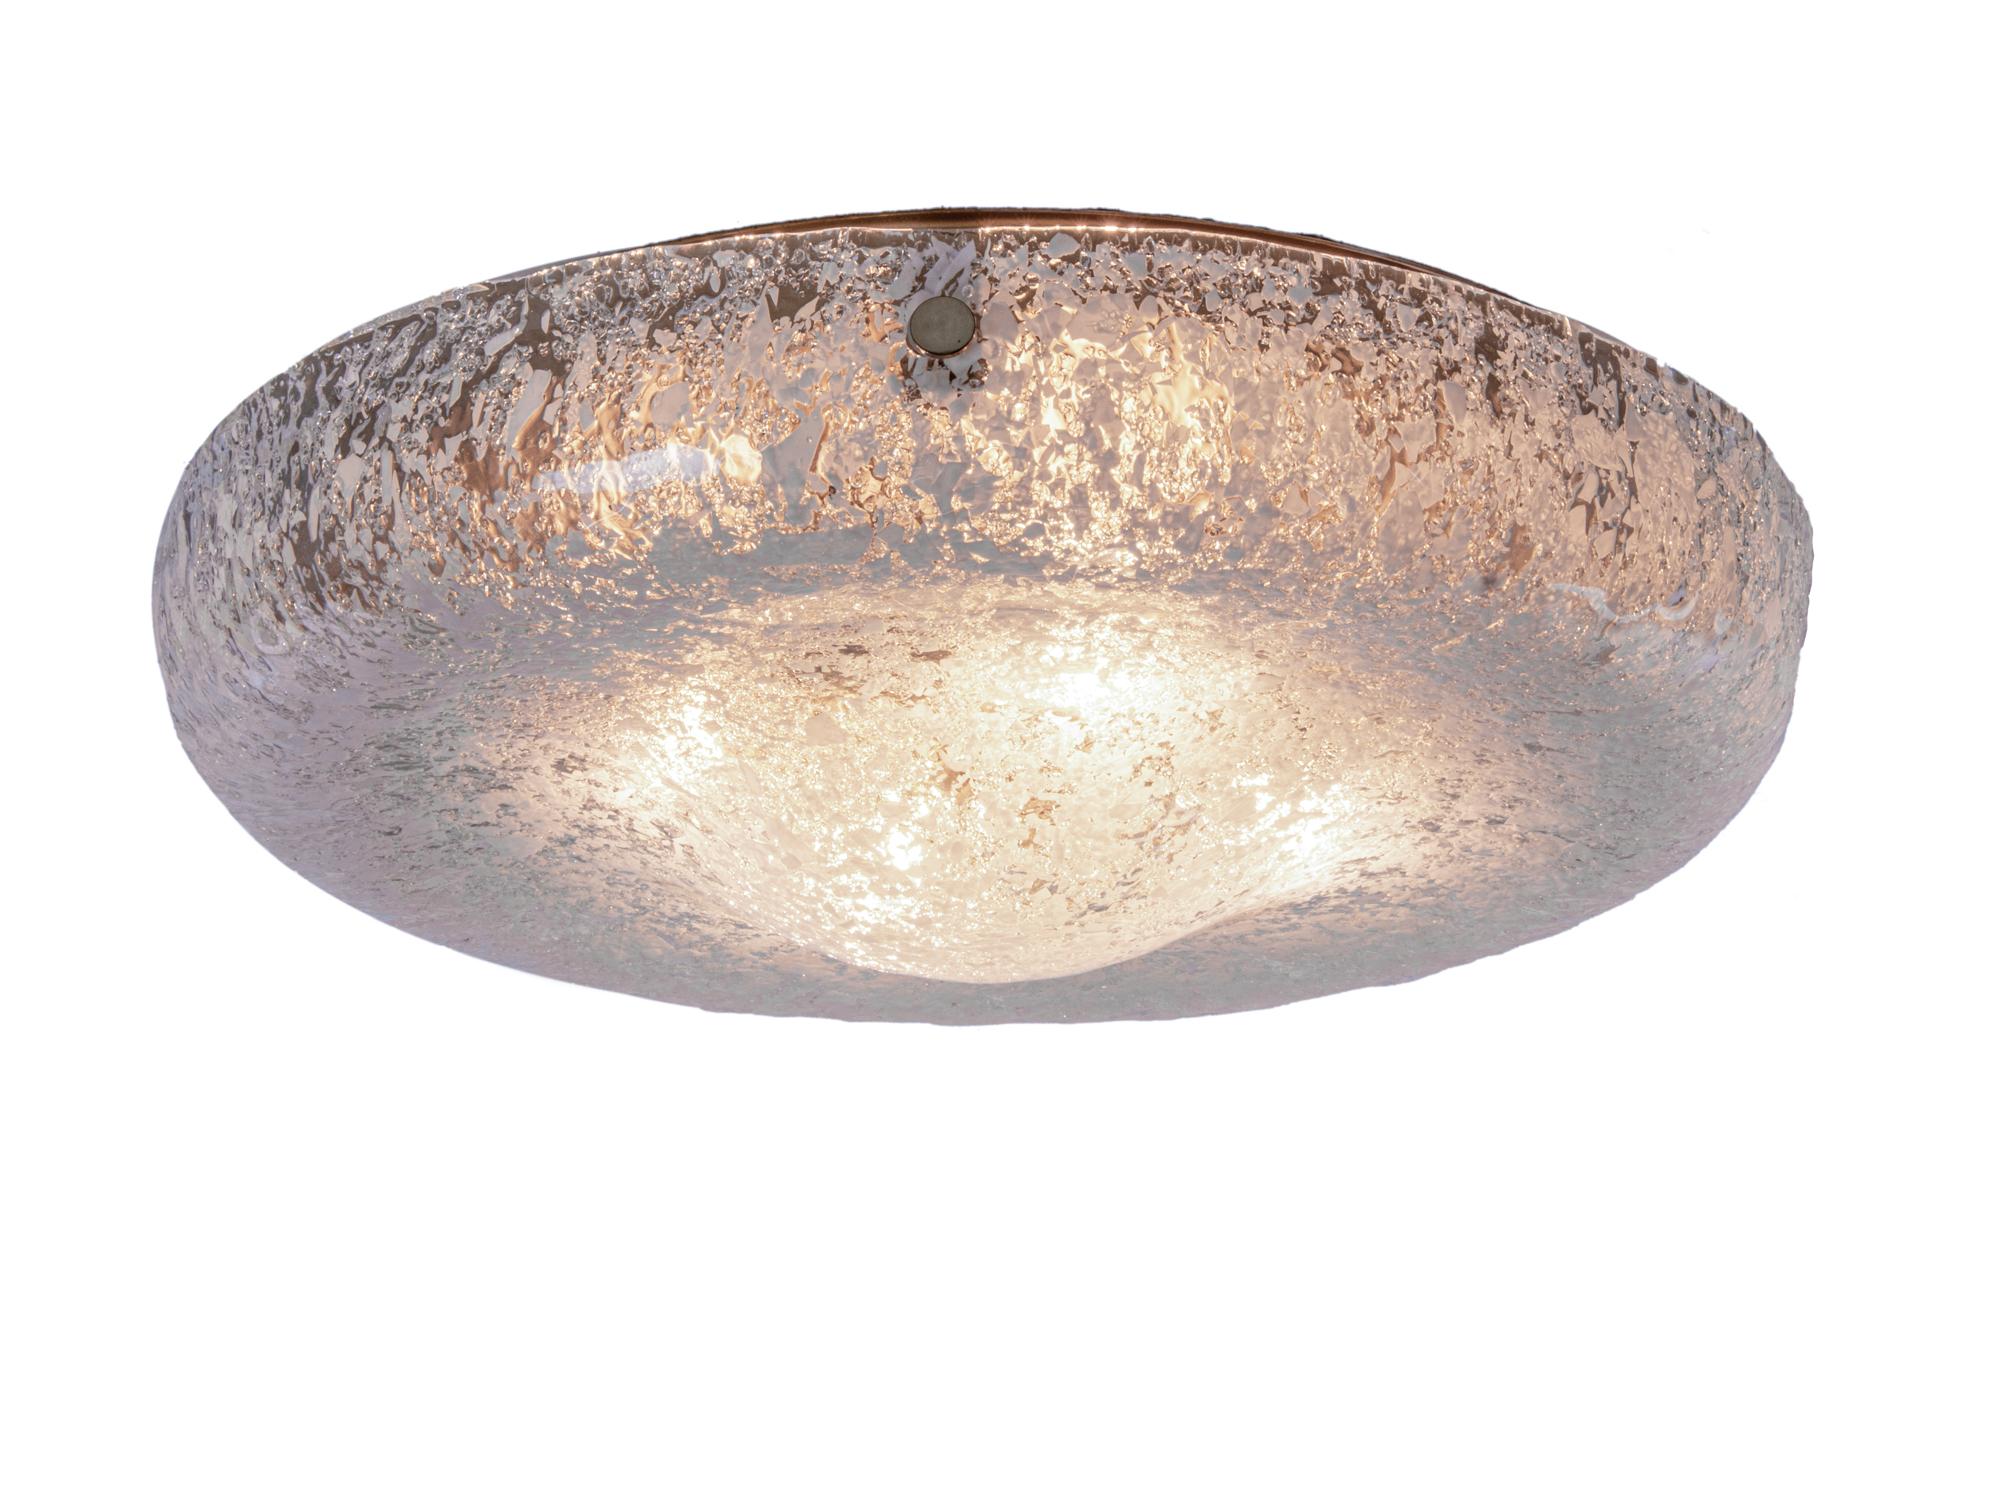 Elegant drum-shaped flush mount ceiling light made of heavy blown Murano glass on a golden frame with brass finals. Illuminated, the lamp appears amber in color with white spots. Manufactured by Kaiser Lighting, Germany in the 1960s. 

Colors: